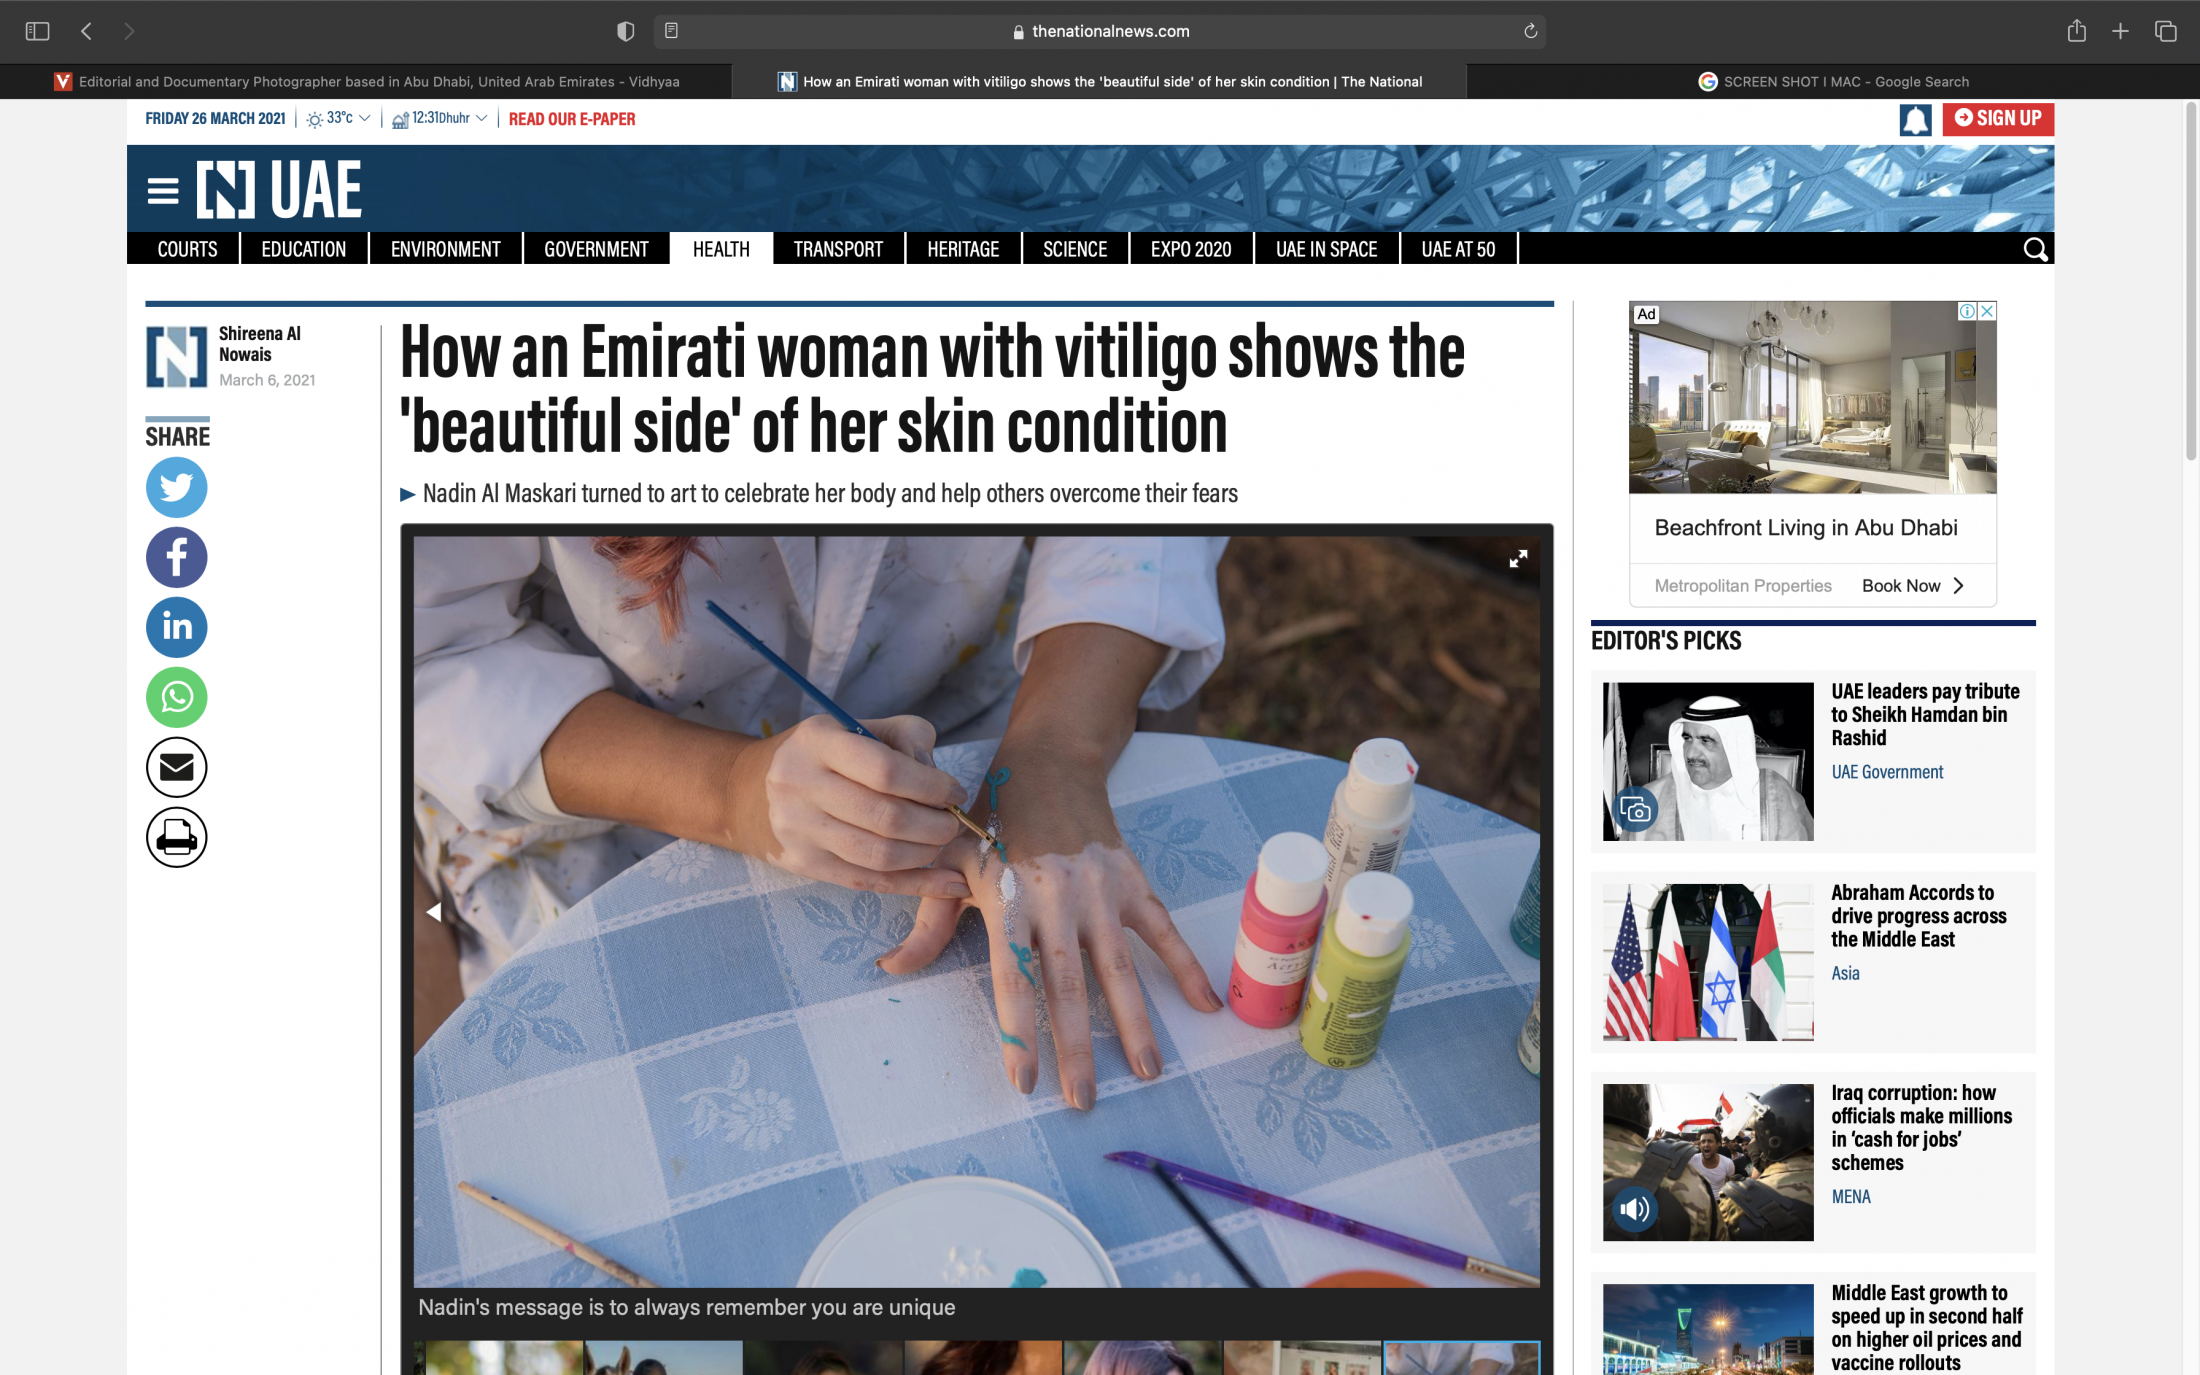 Tearsheets - How an Emirati woman with vitiligo shows the 'beautiful side' of her skin condition